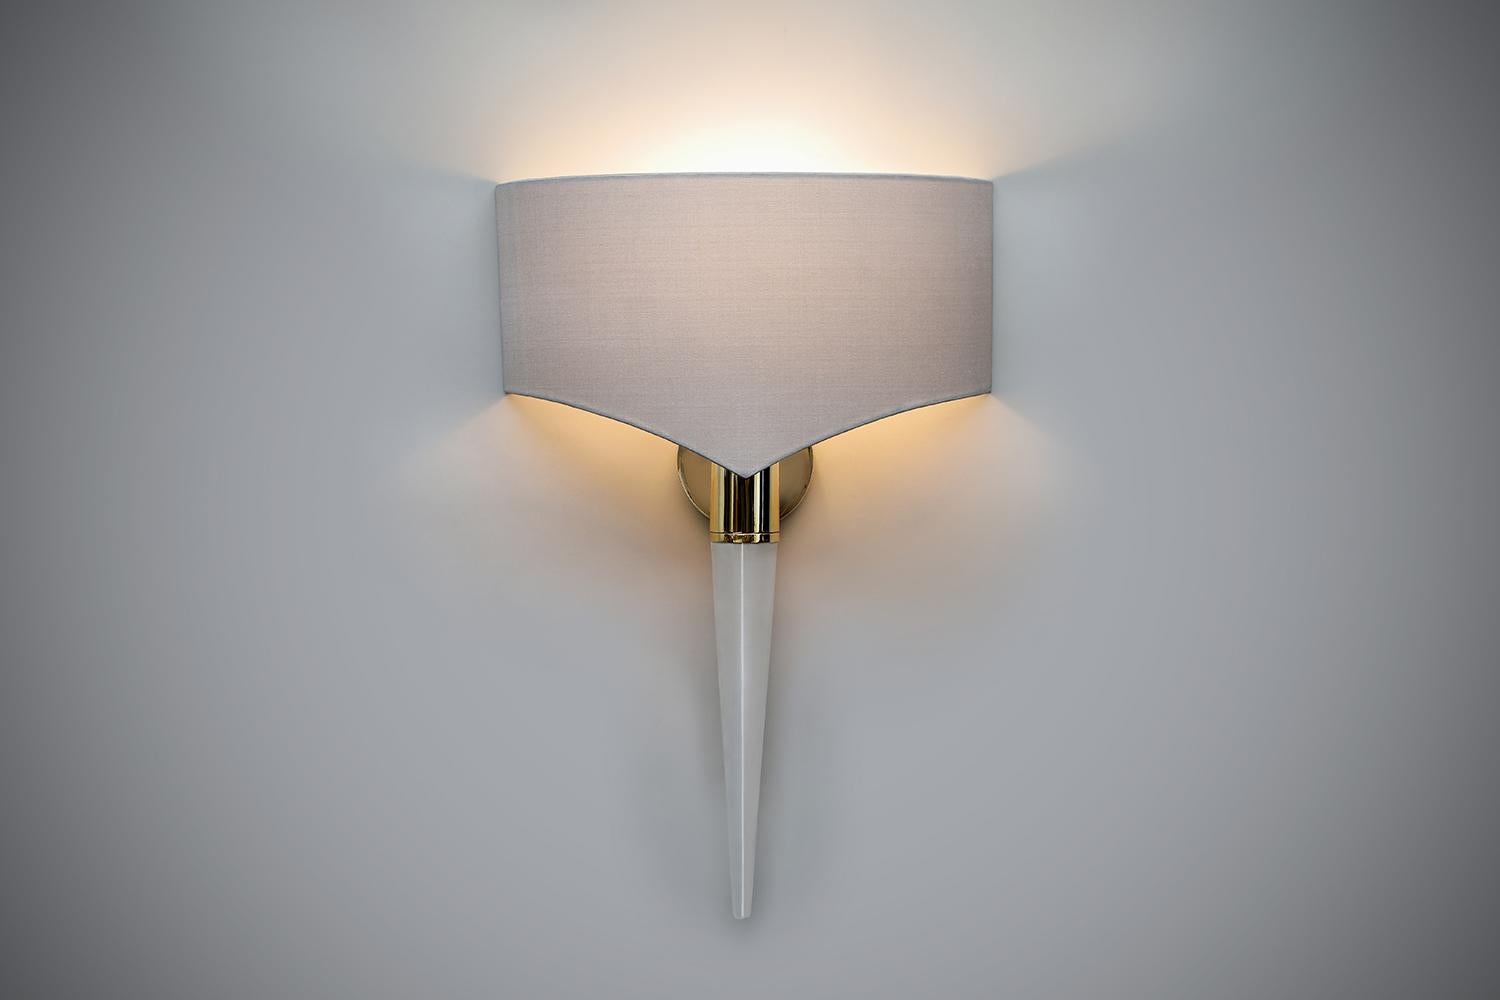 Designed with the famous Cartier ‘Clou’ bracelet in mind, this stunning light has been handmade with carefully polished rock crystal and finished in polished brass. The bespoke-made shade compliments the shape beautifully.

Each light is limited in